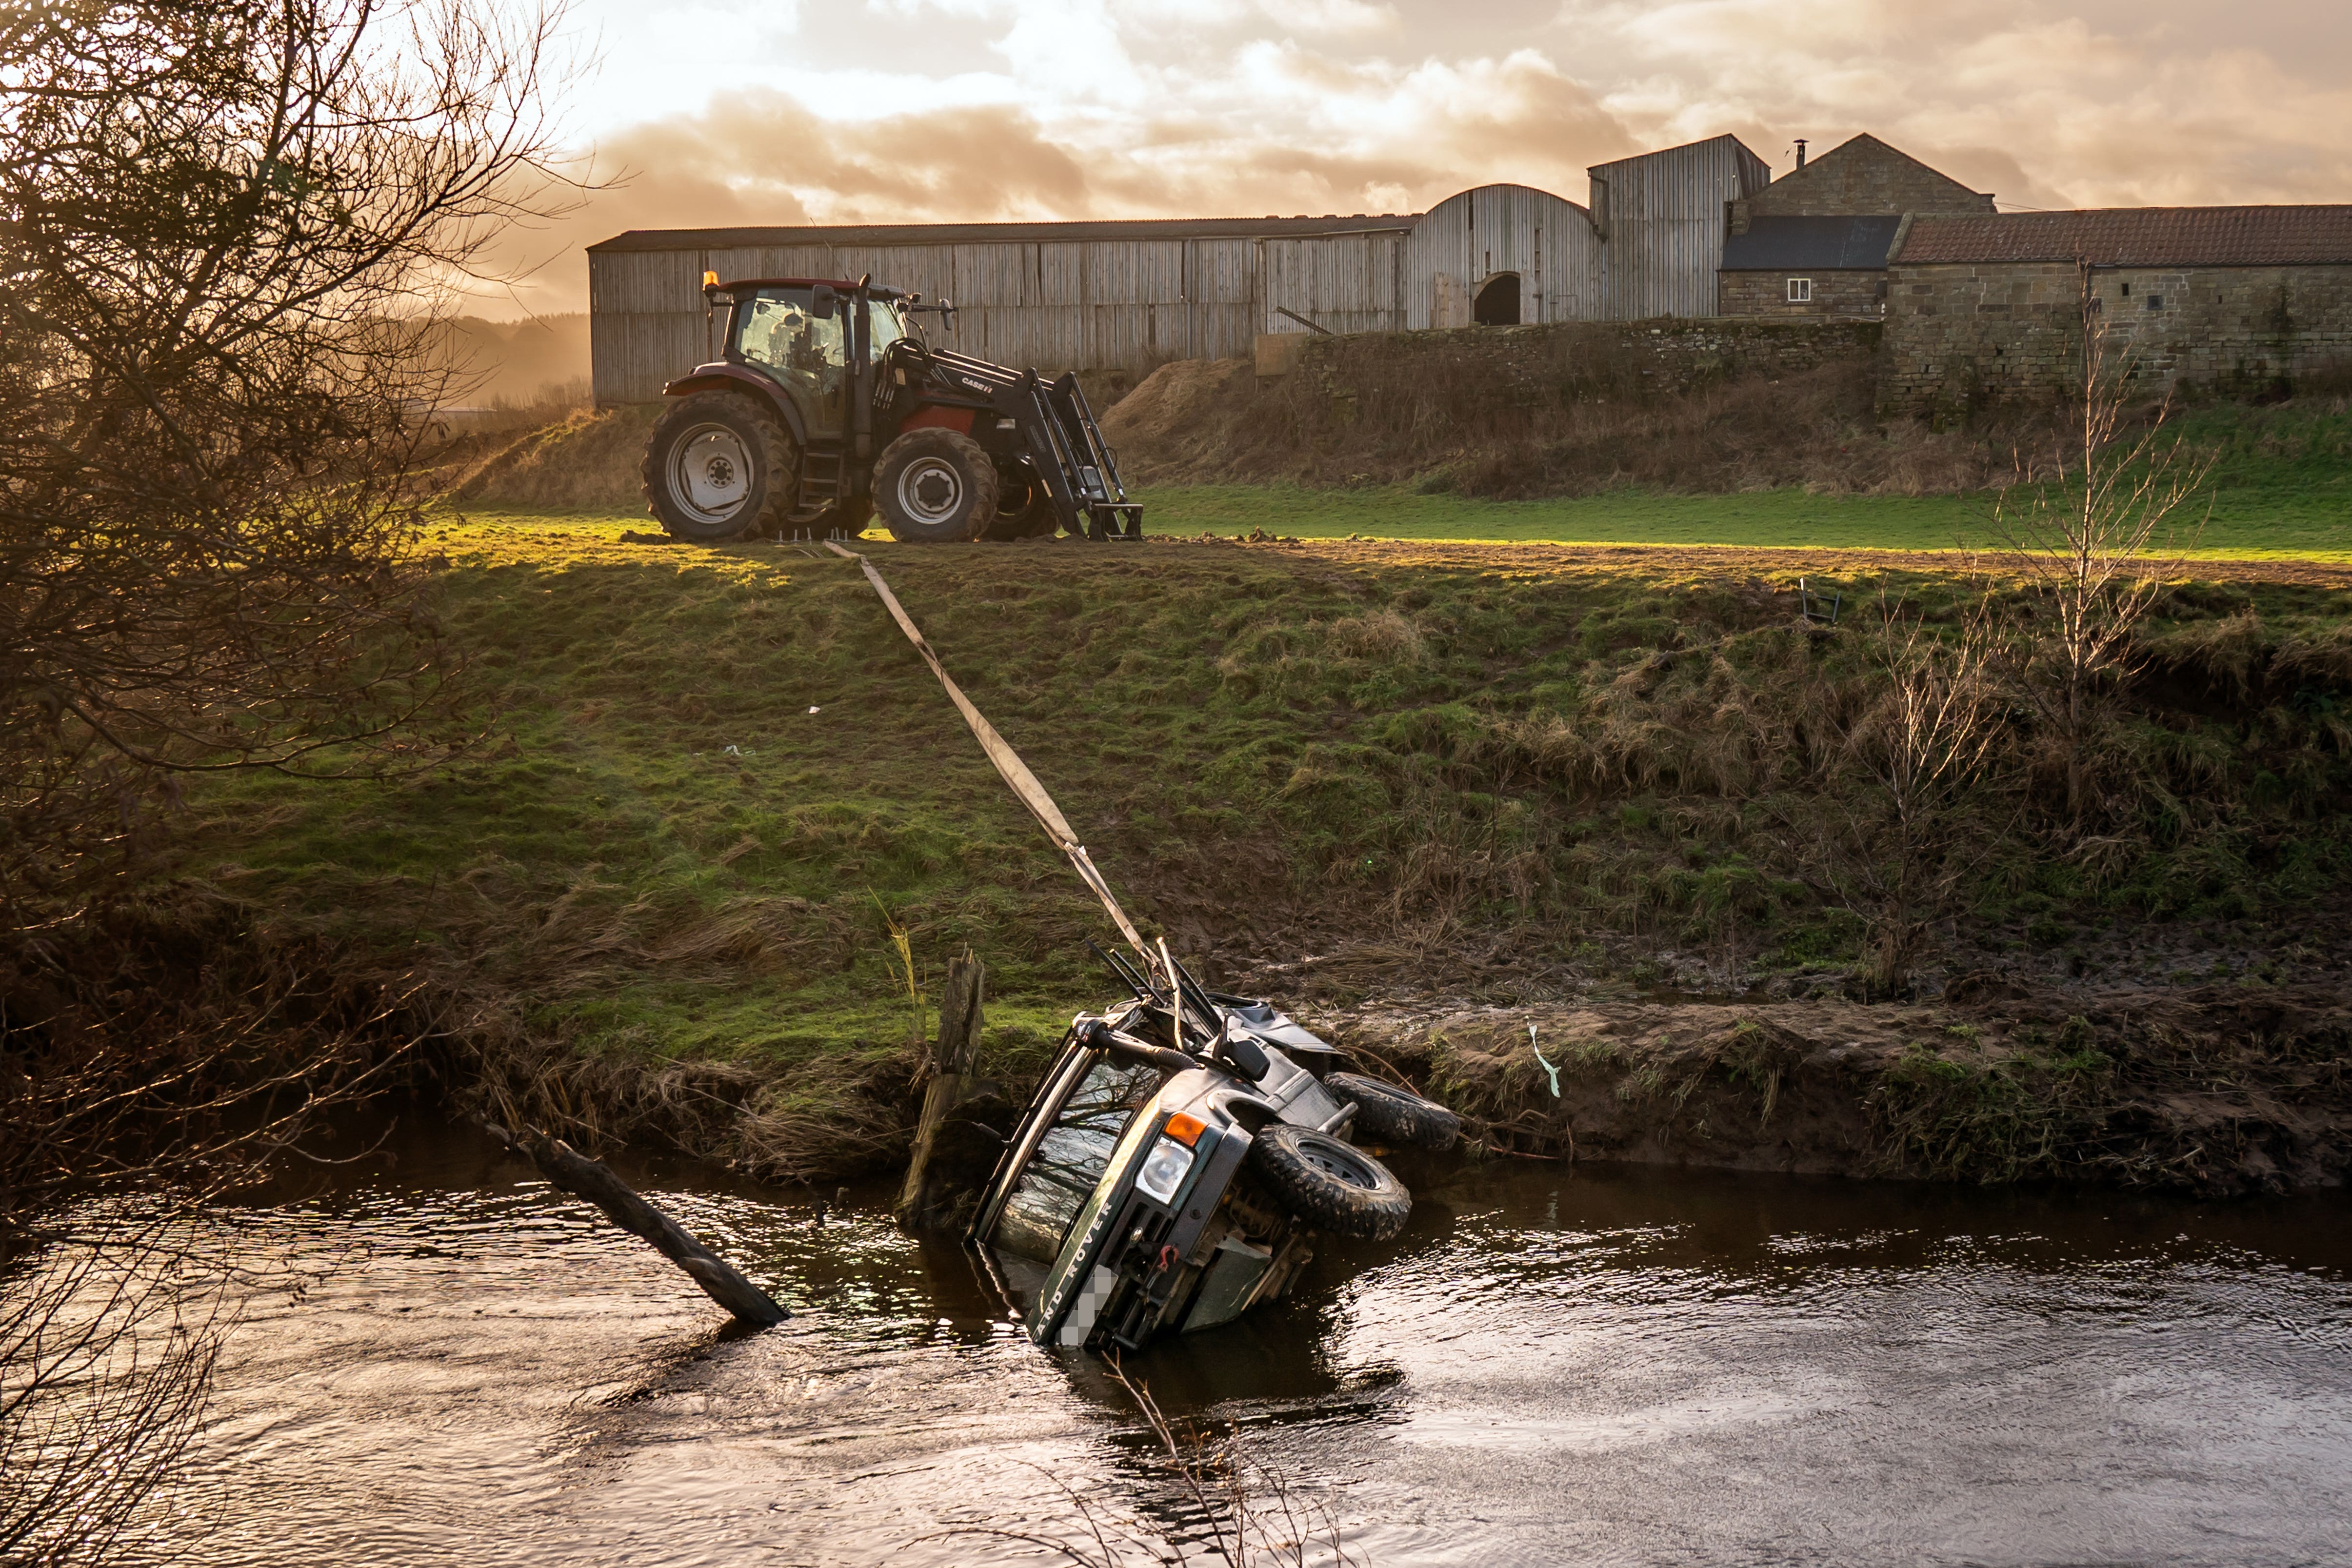 The vehicle was removed from the water using tethers (Danny Lawson/PA)